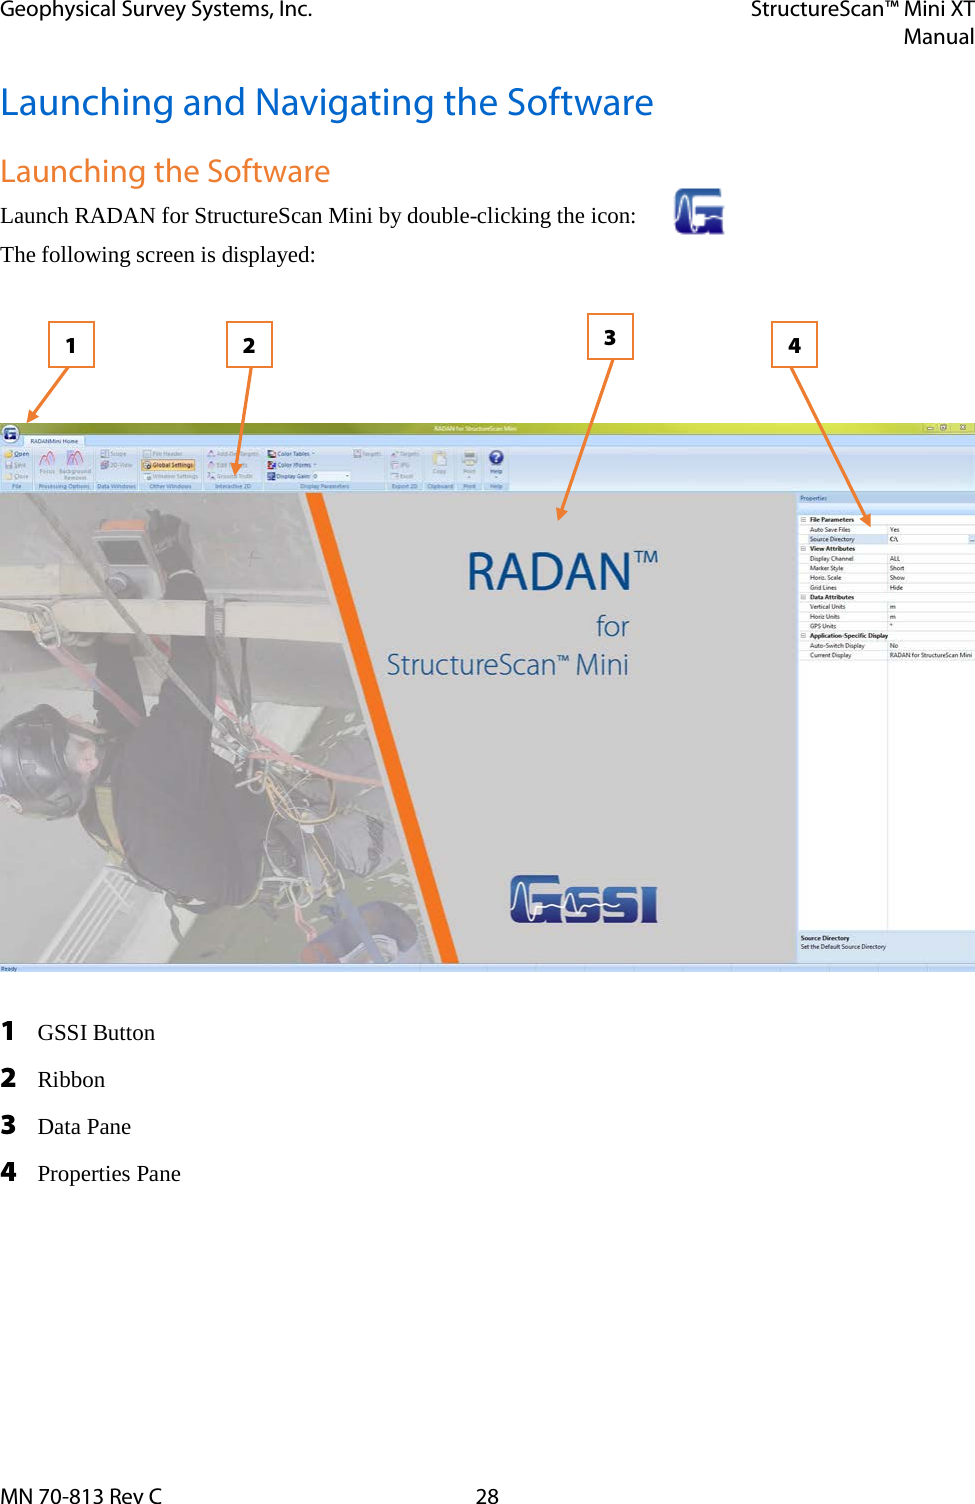 Geophysical Survey Systems, Inc. StructureScan™ Mini XT  Manual  MN 70-813 Rev C 28 Launching and Navigating the Software Launching the Software Launch RADAN for StructureScan Mini by double-clicking the icon:  The following screen is displayed:   1 GSSI Button 2 Ribbon 3 Data Pane 4 Properties Pane    1 3 4 2 